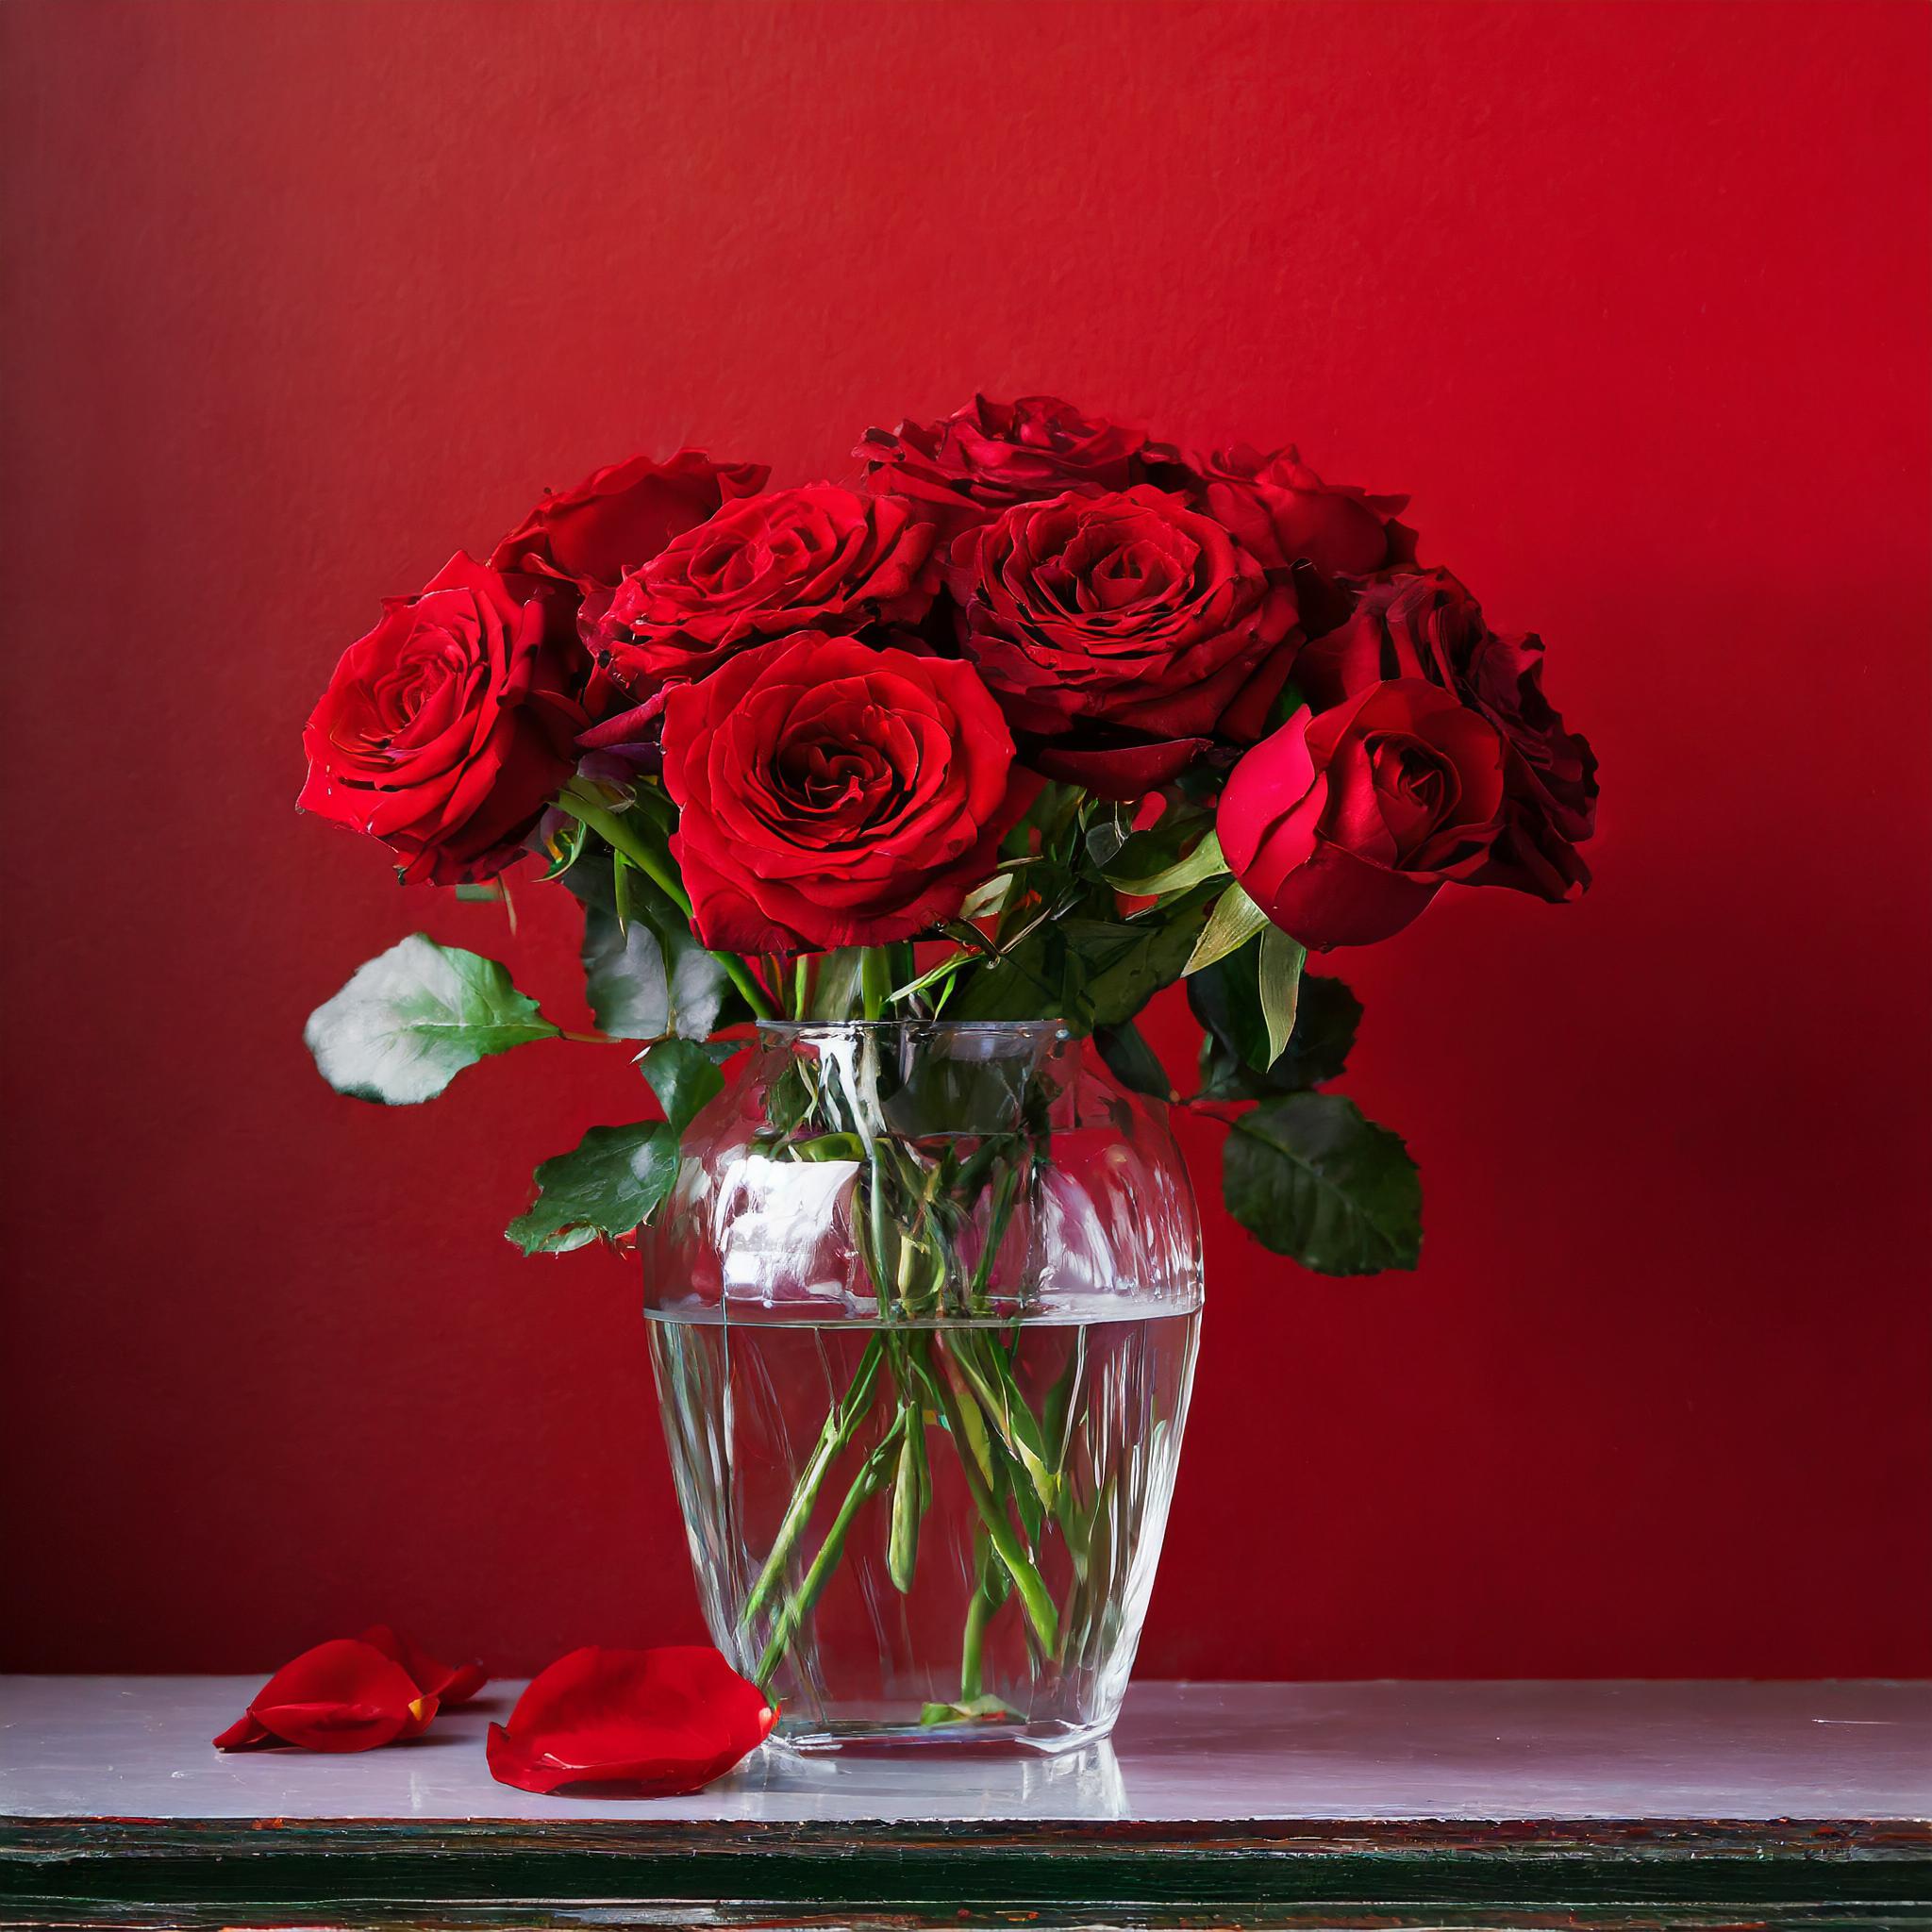 Firefly a glass vase with red roses in front of a red wall 99541